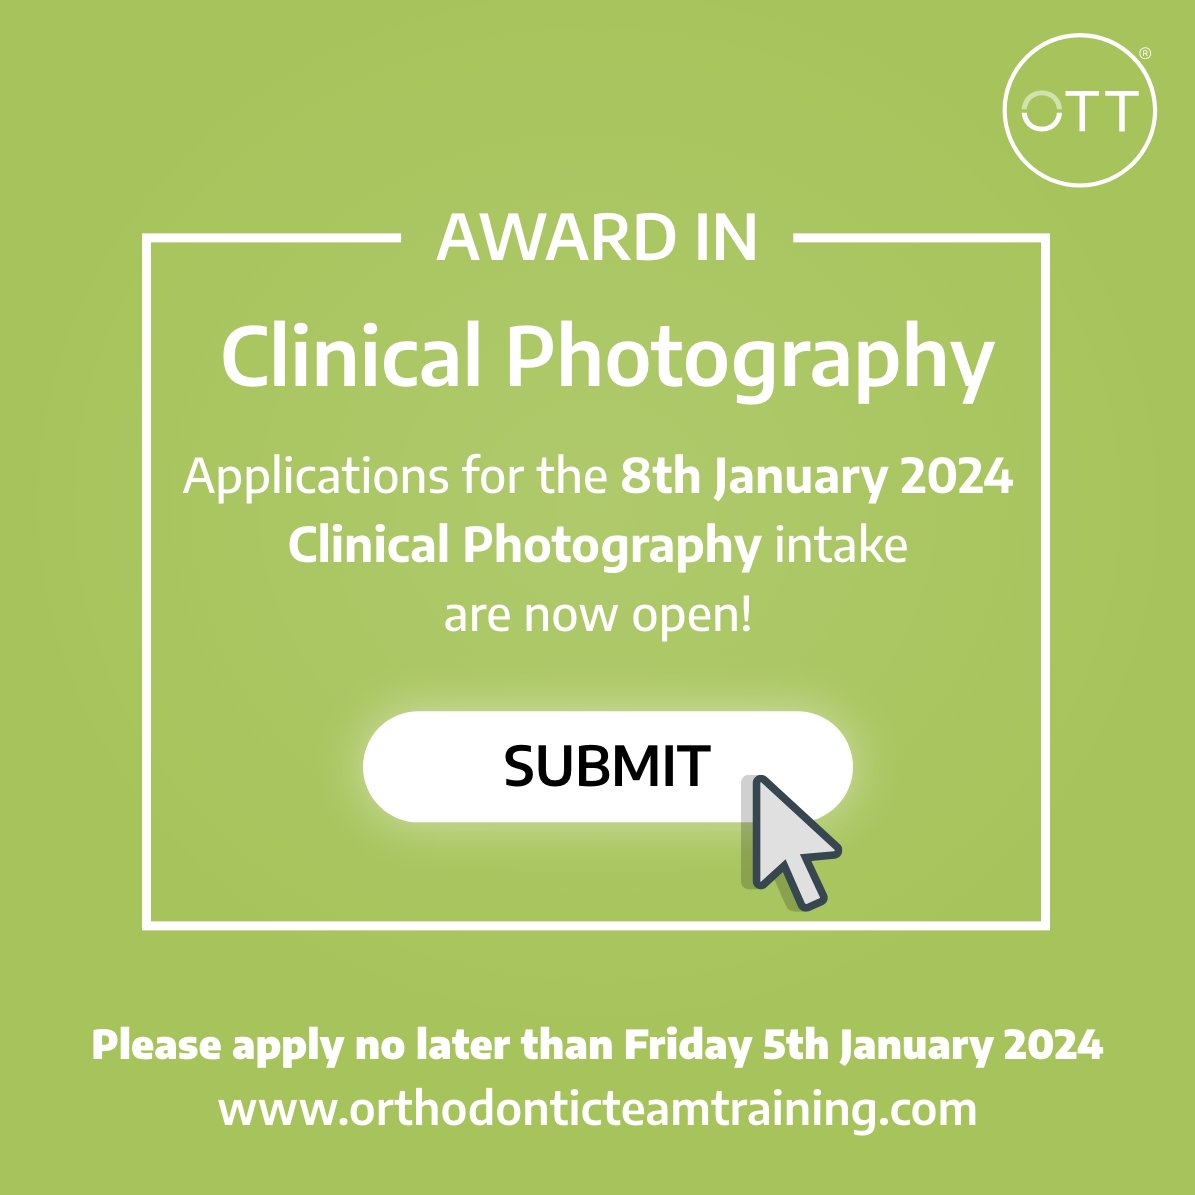 You'll be excited to know that applications are now open for our next Award in Clinical Photography! The course starts on January 8th, so submit your application by Friday, January 5th. Click the link below to apply:
book.orthodonticteamtraining.com/collections/aw…

#orthodontics  #clinicalphotography